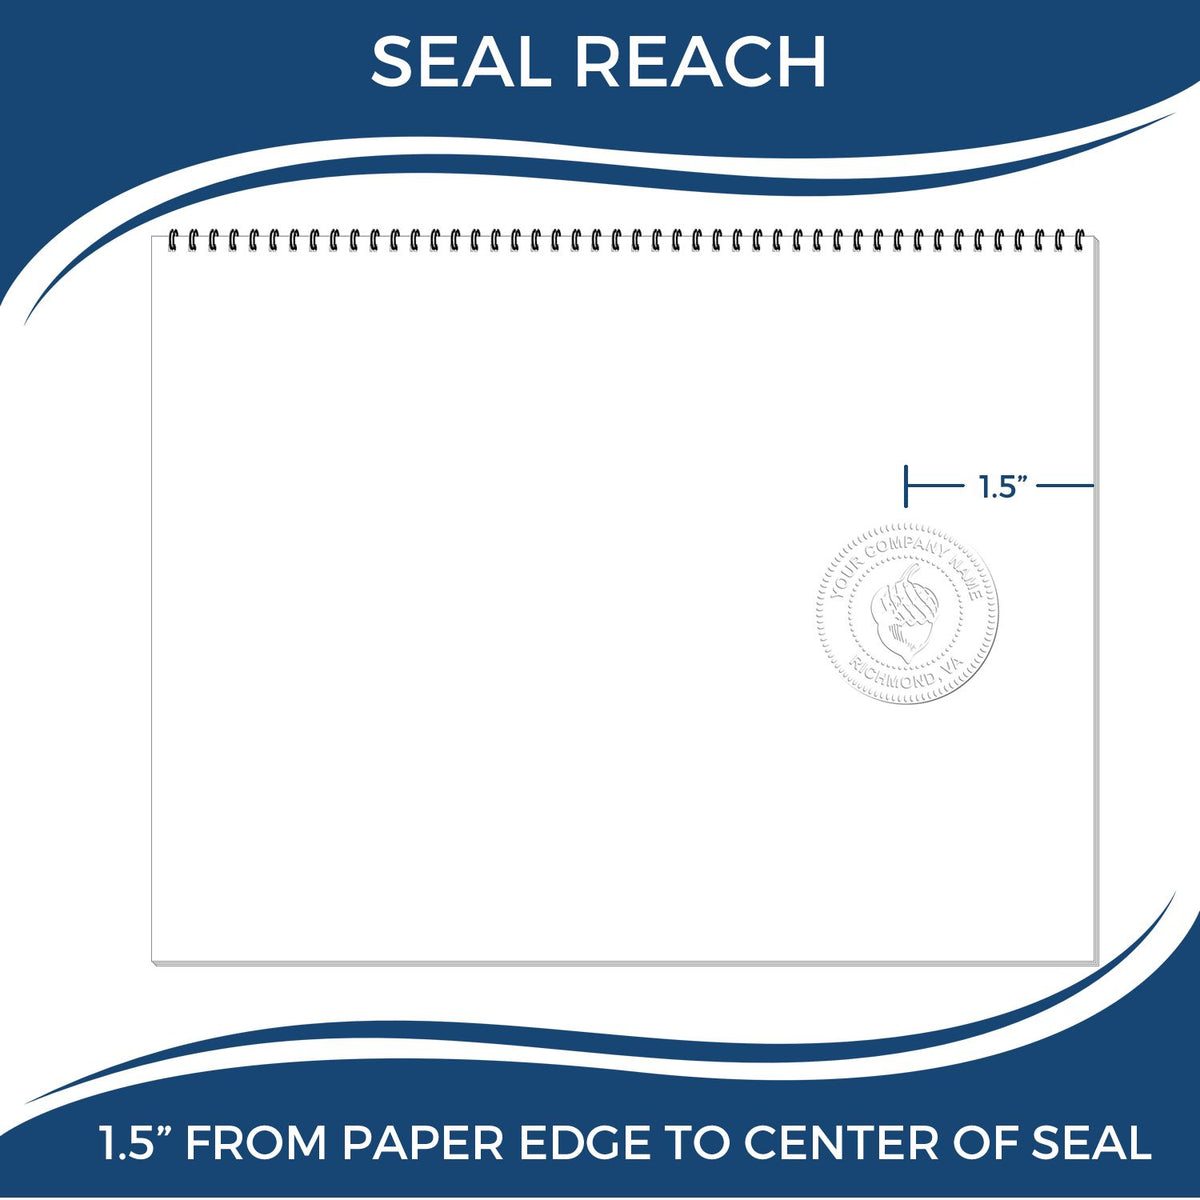 An infographic showing the seal reach which is represented by a ruler and a miniature seal image of the Handheld Maine Professional Engineer Embosser